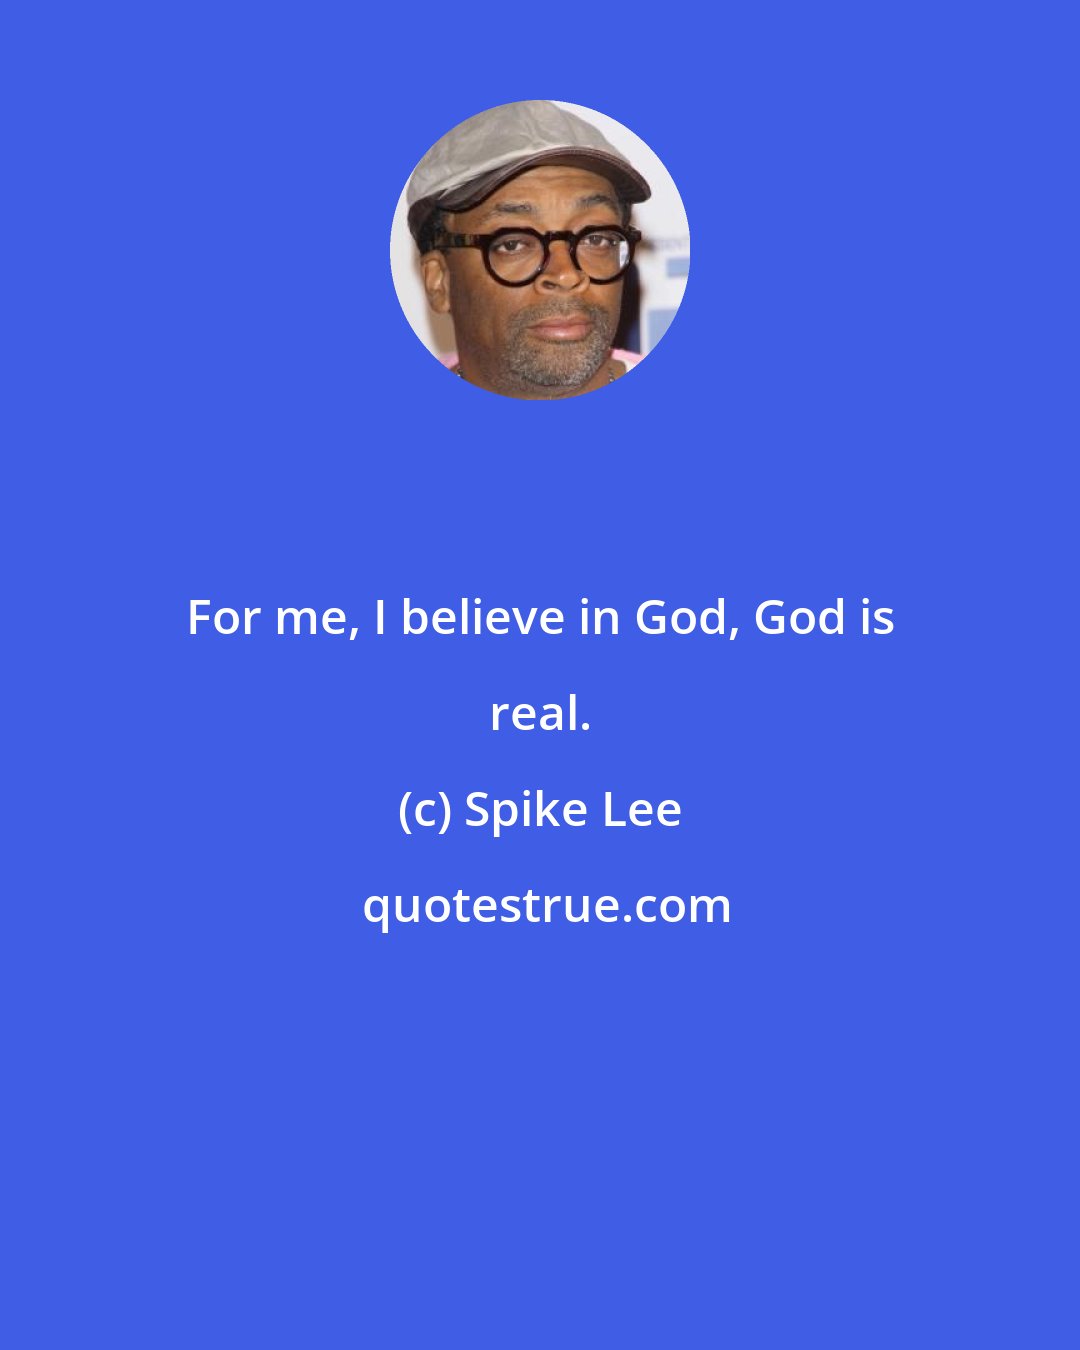 Spike Lee: For me, I believe in God, God is real.